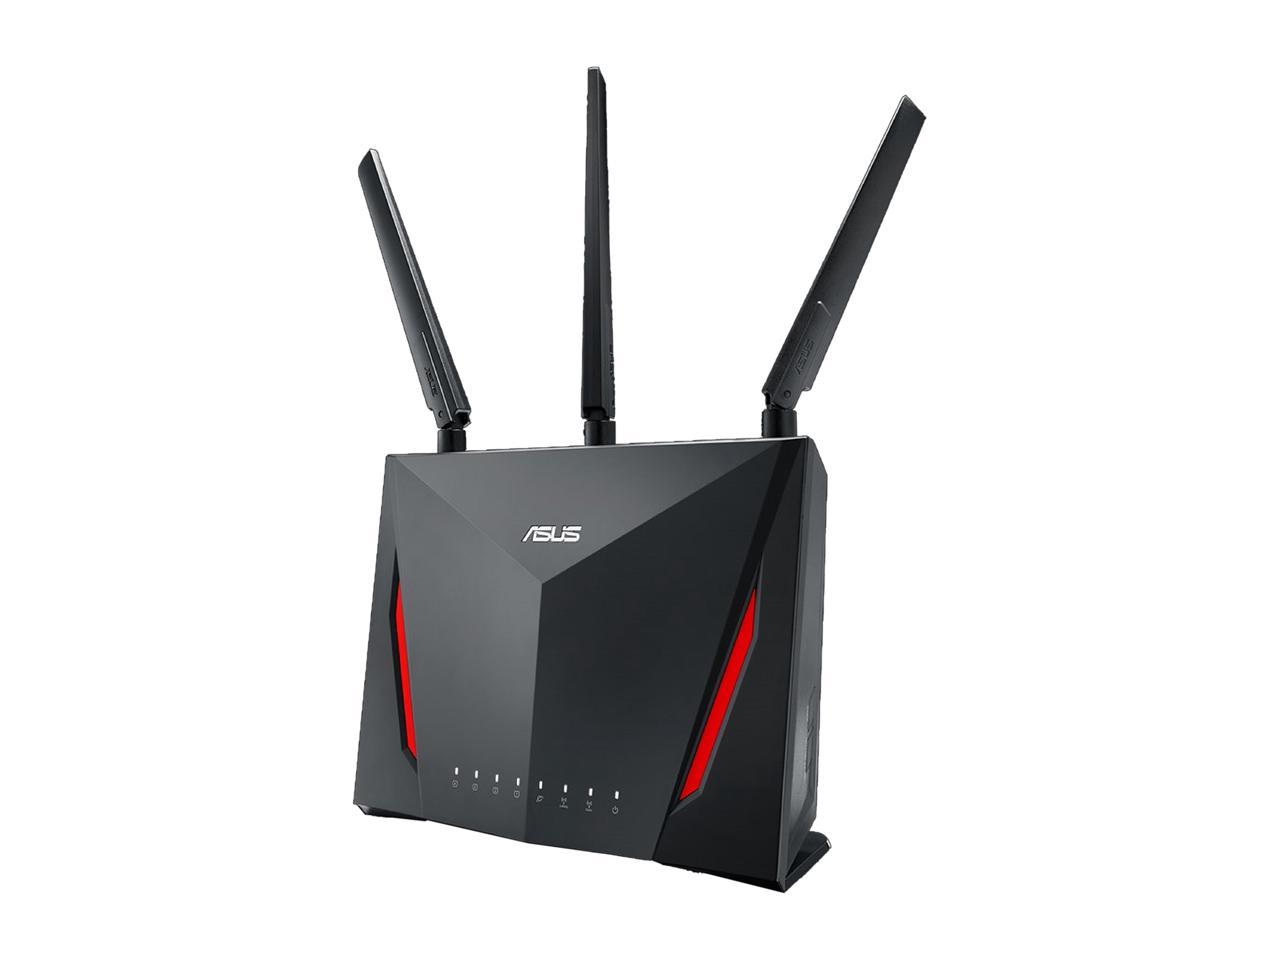 ASUS AC2900 Dual-band Gaming Router, game acceleration, Mesh Wi-Fi support, Lifetime Free Internet Security, DFS, Gamer Private Network, Port Forwarding, Streaming & Gaming (RT-AC86U) - image 3 of 7